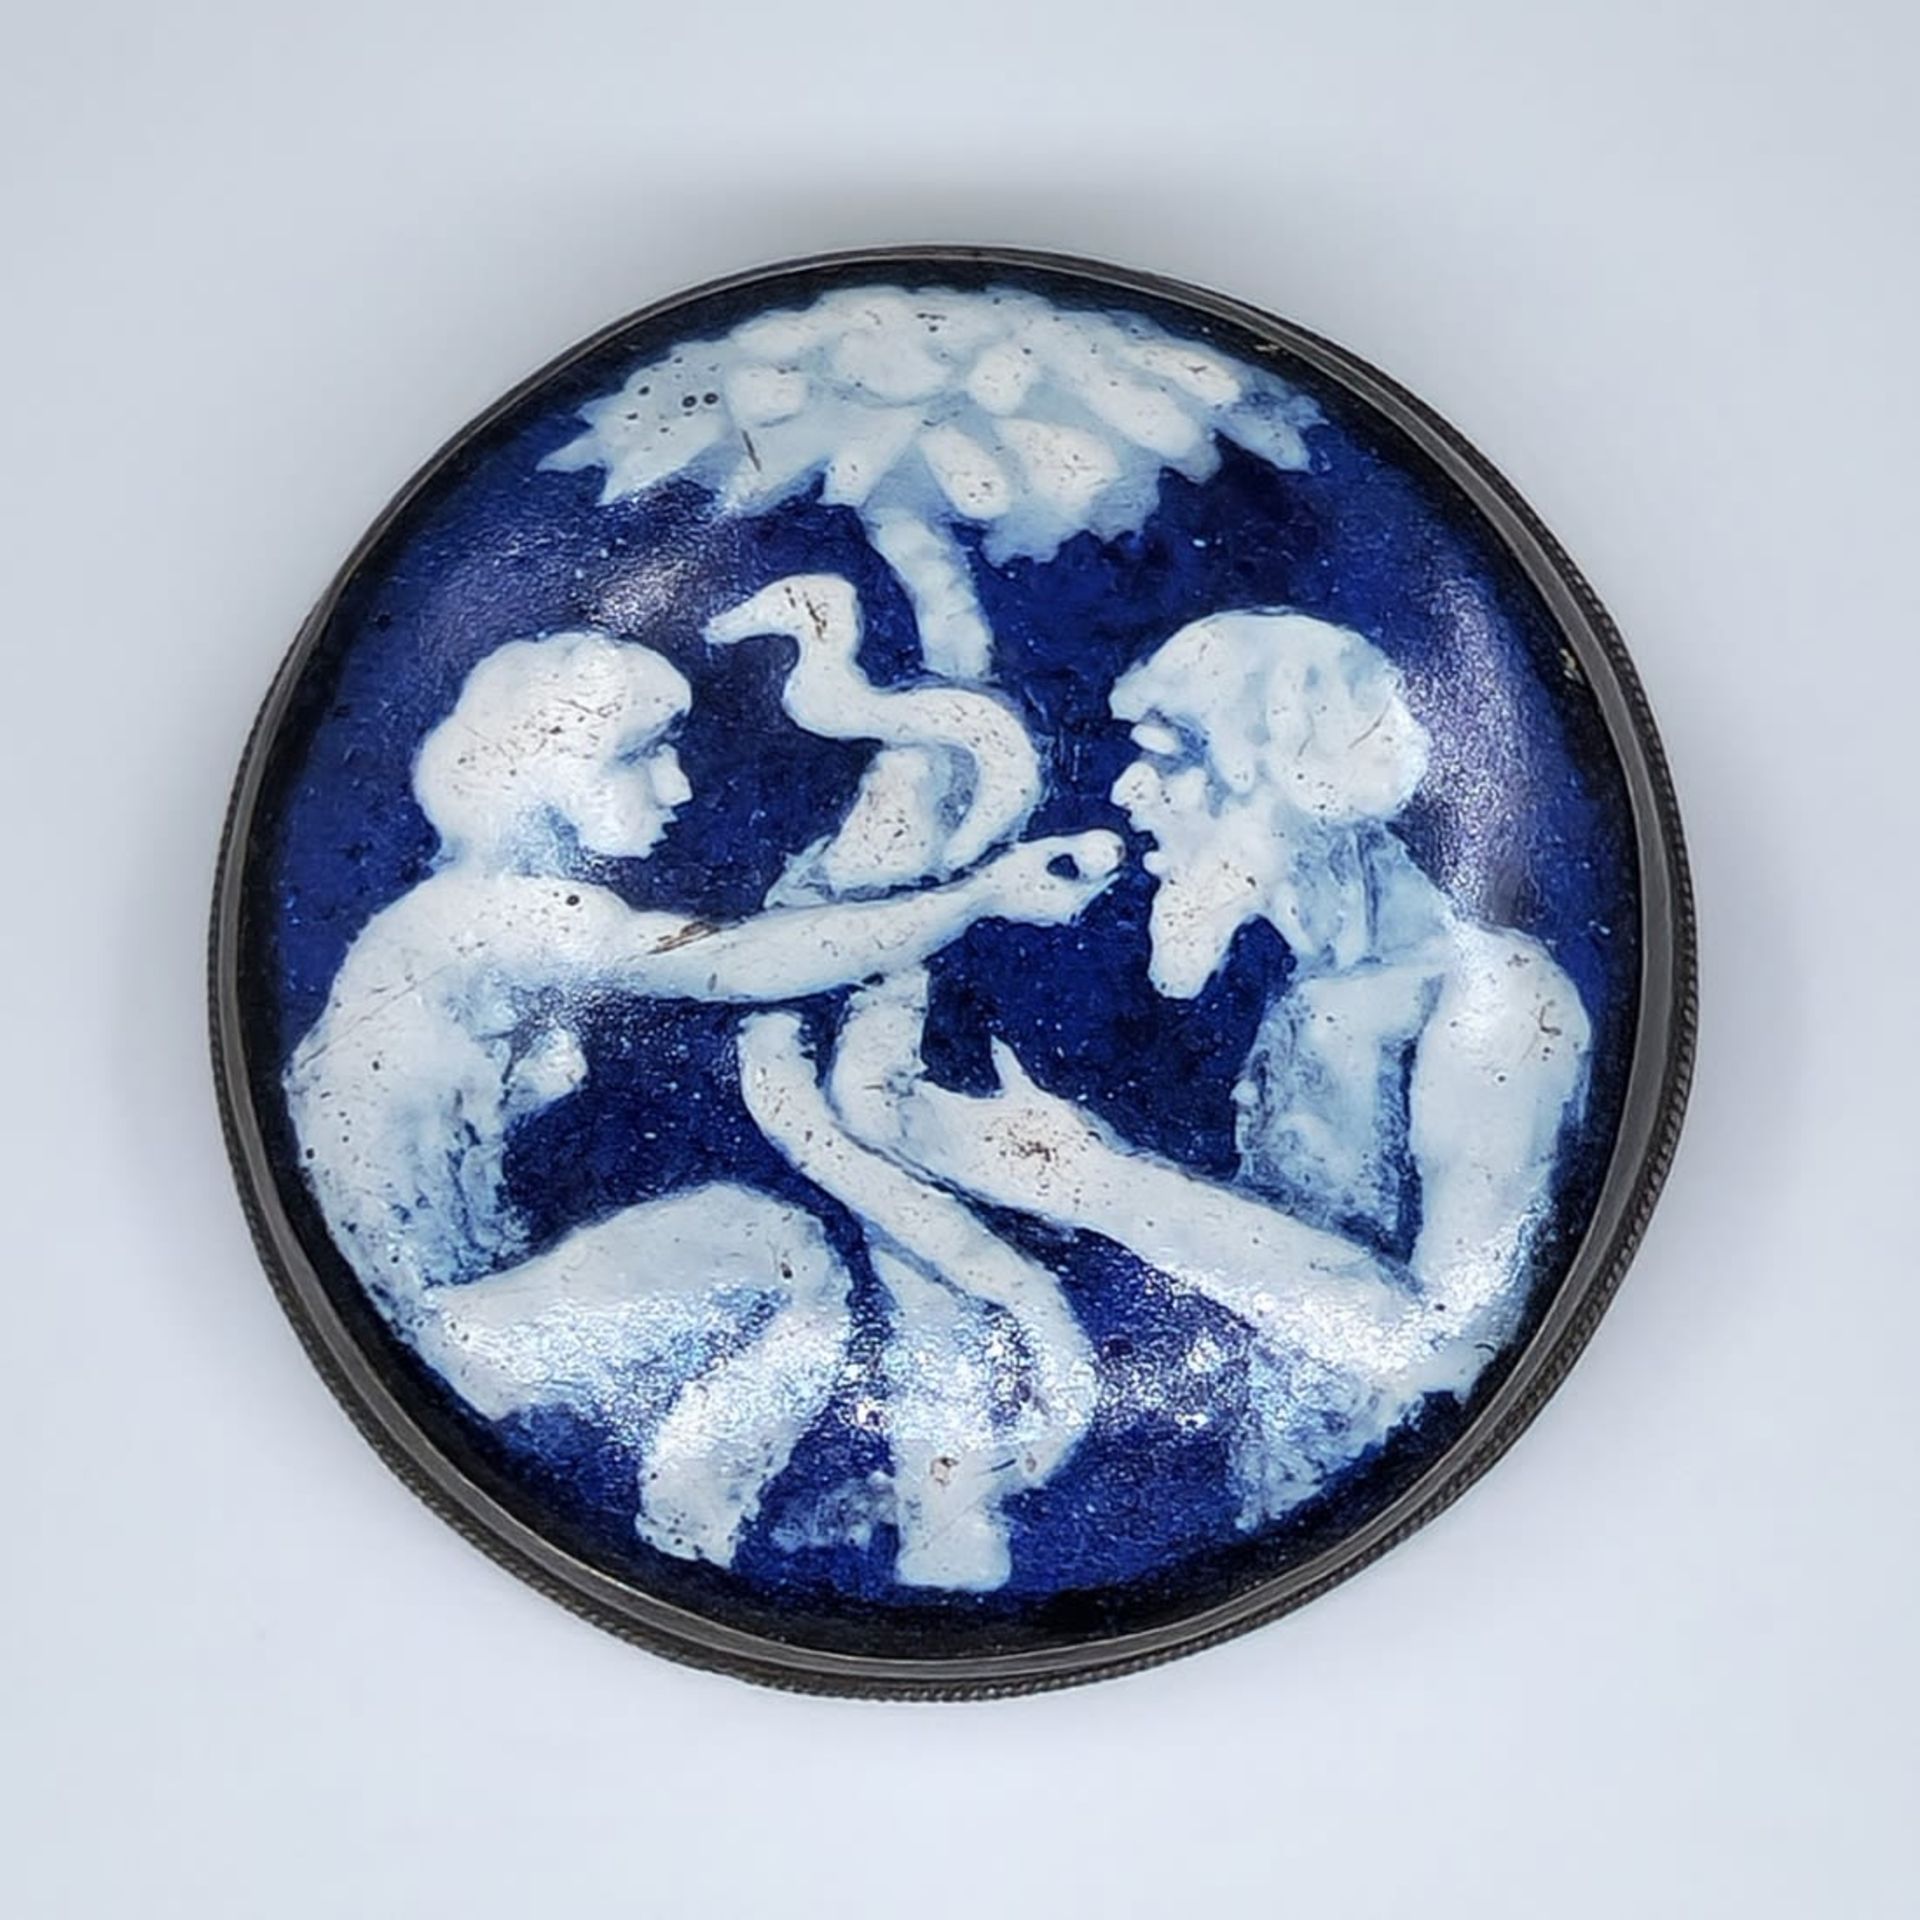 An enamel panel made by 'Bezalel', decorated with the image of Adam, Eve, and the snake next to